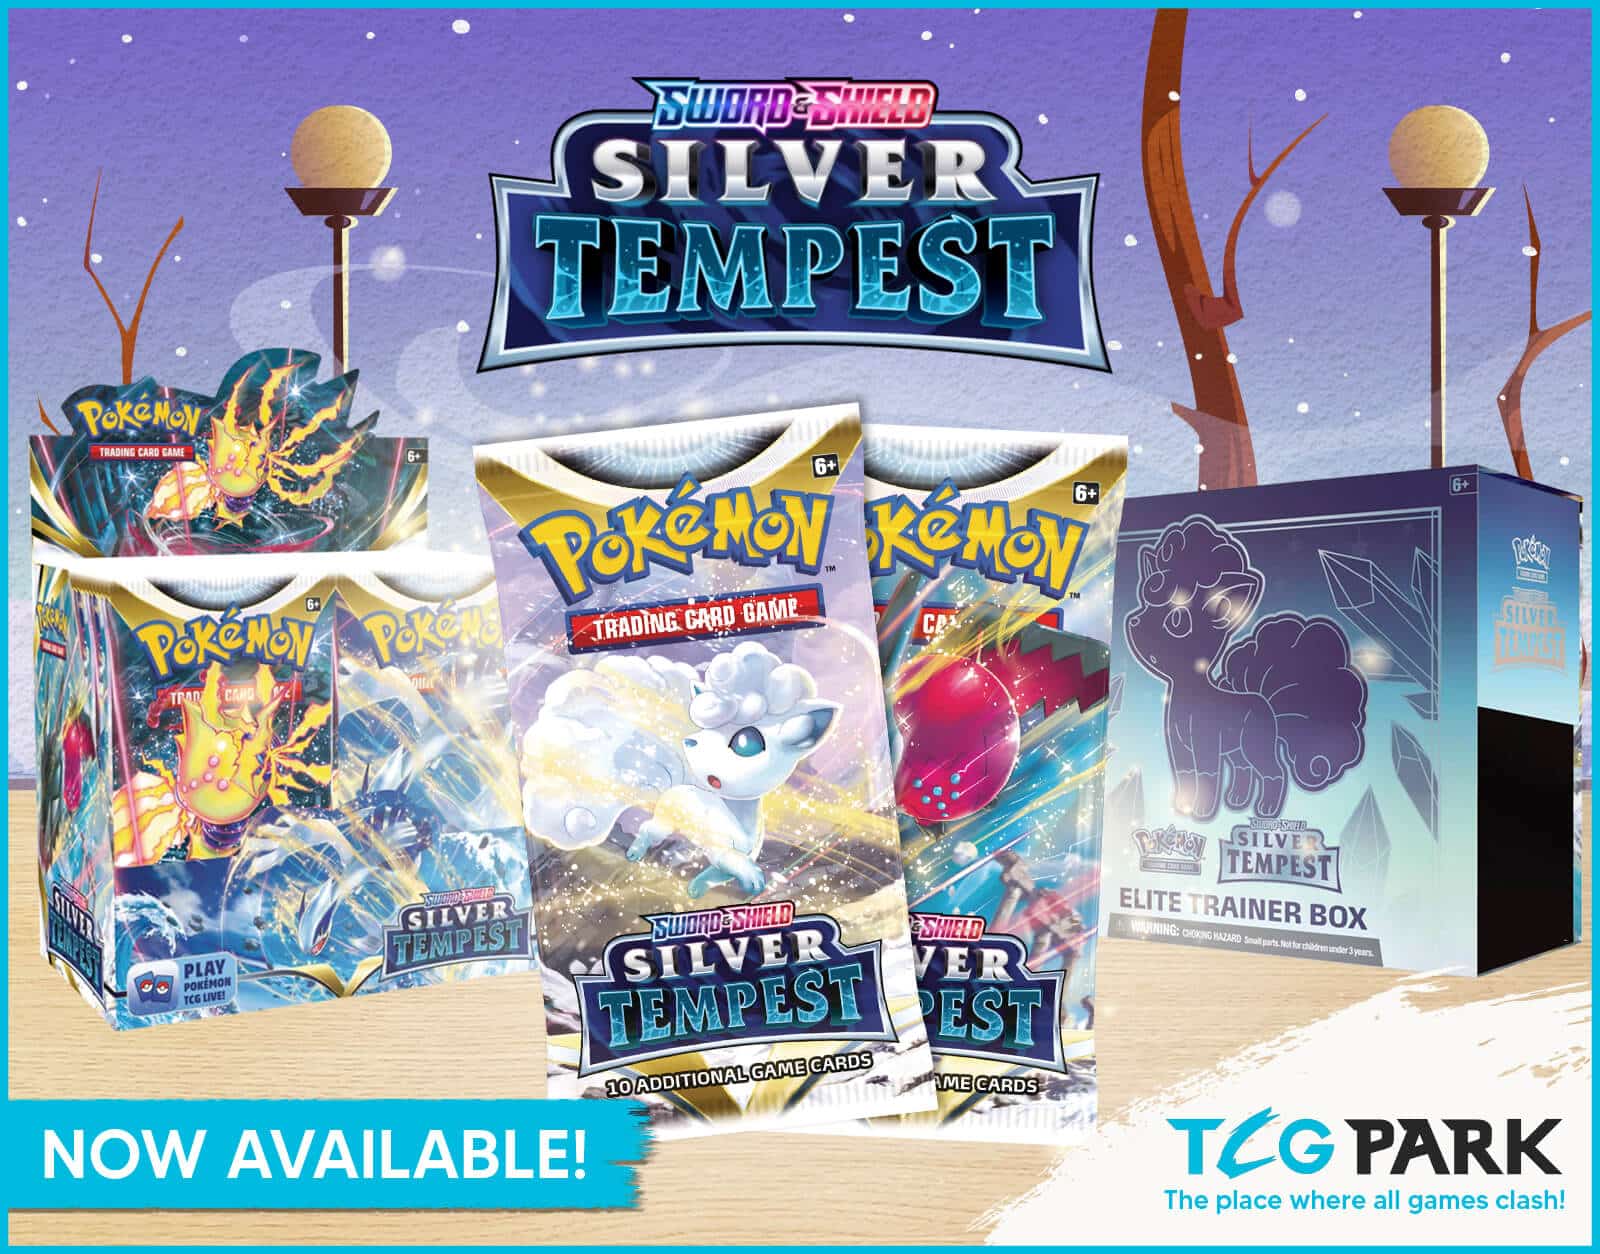 silver templest available now